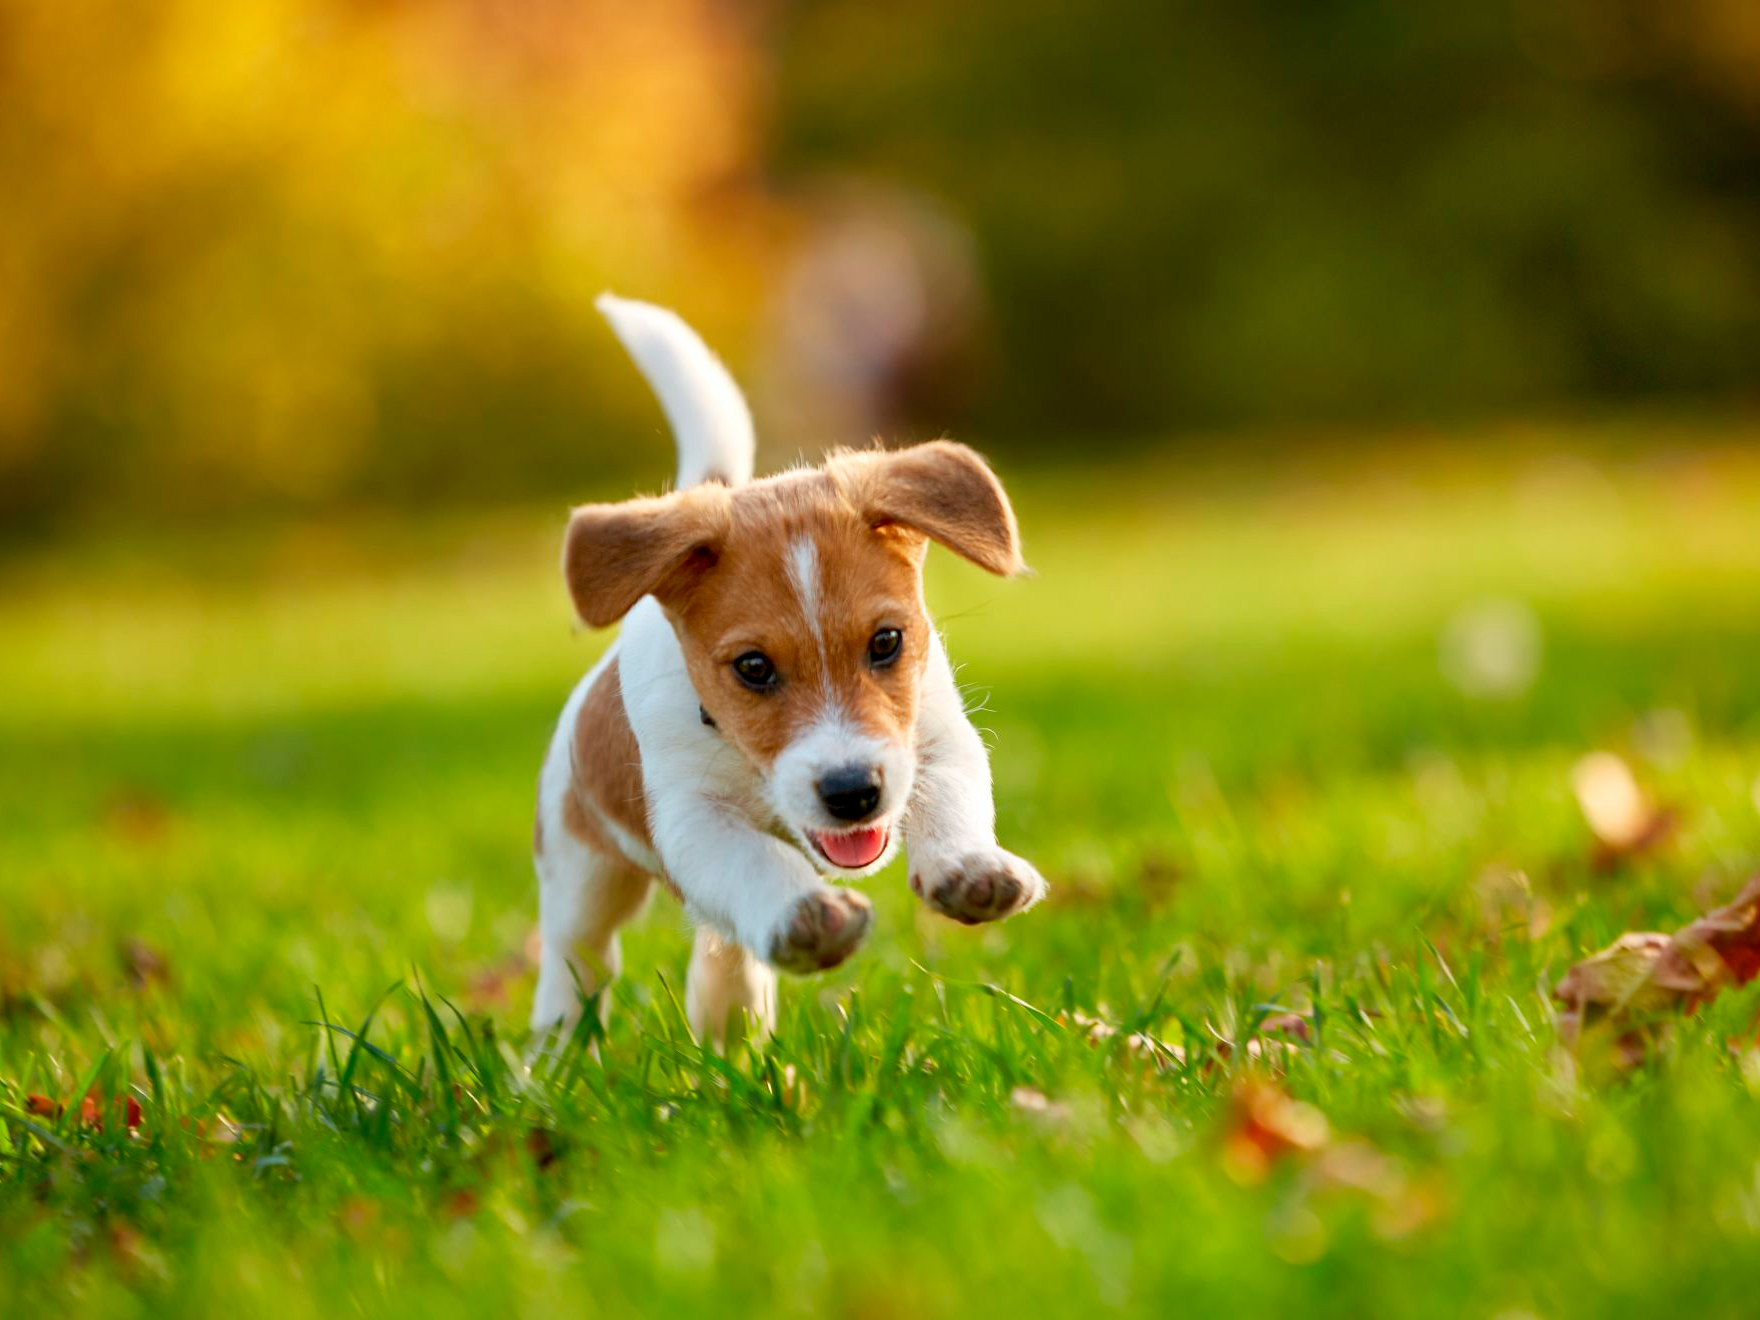 Jack Russell Terrier, dog breed, playing in an autumn park